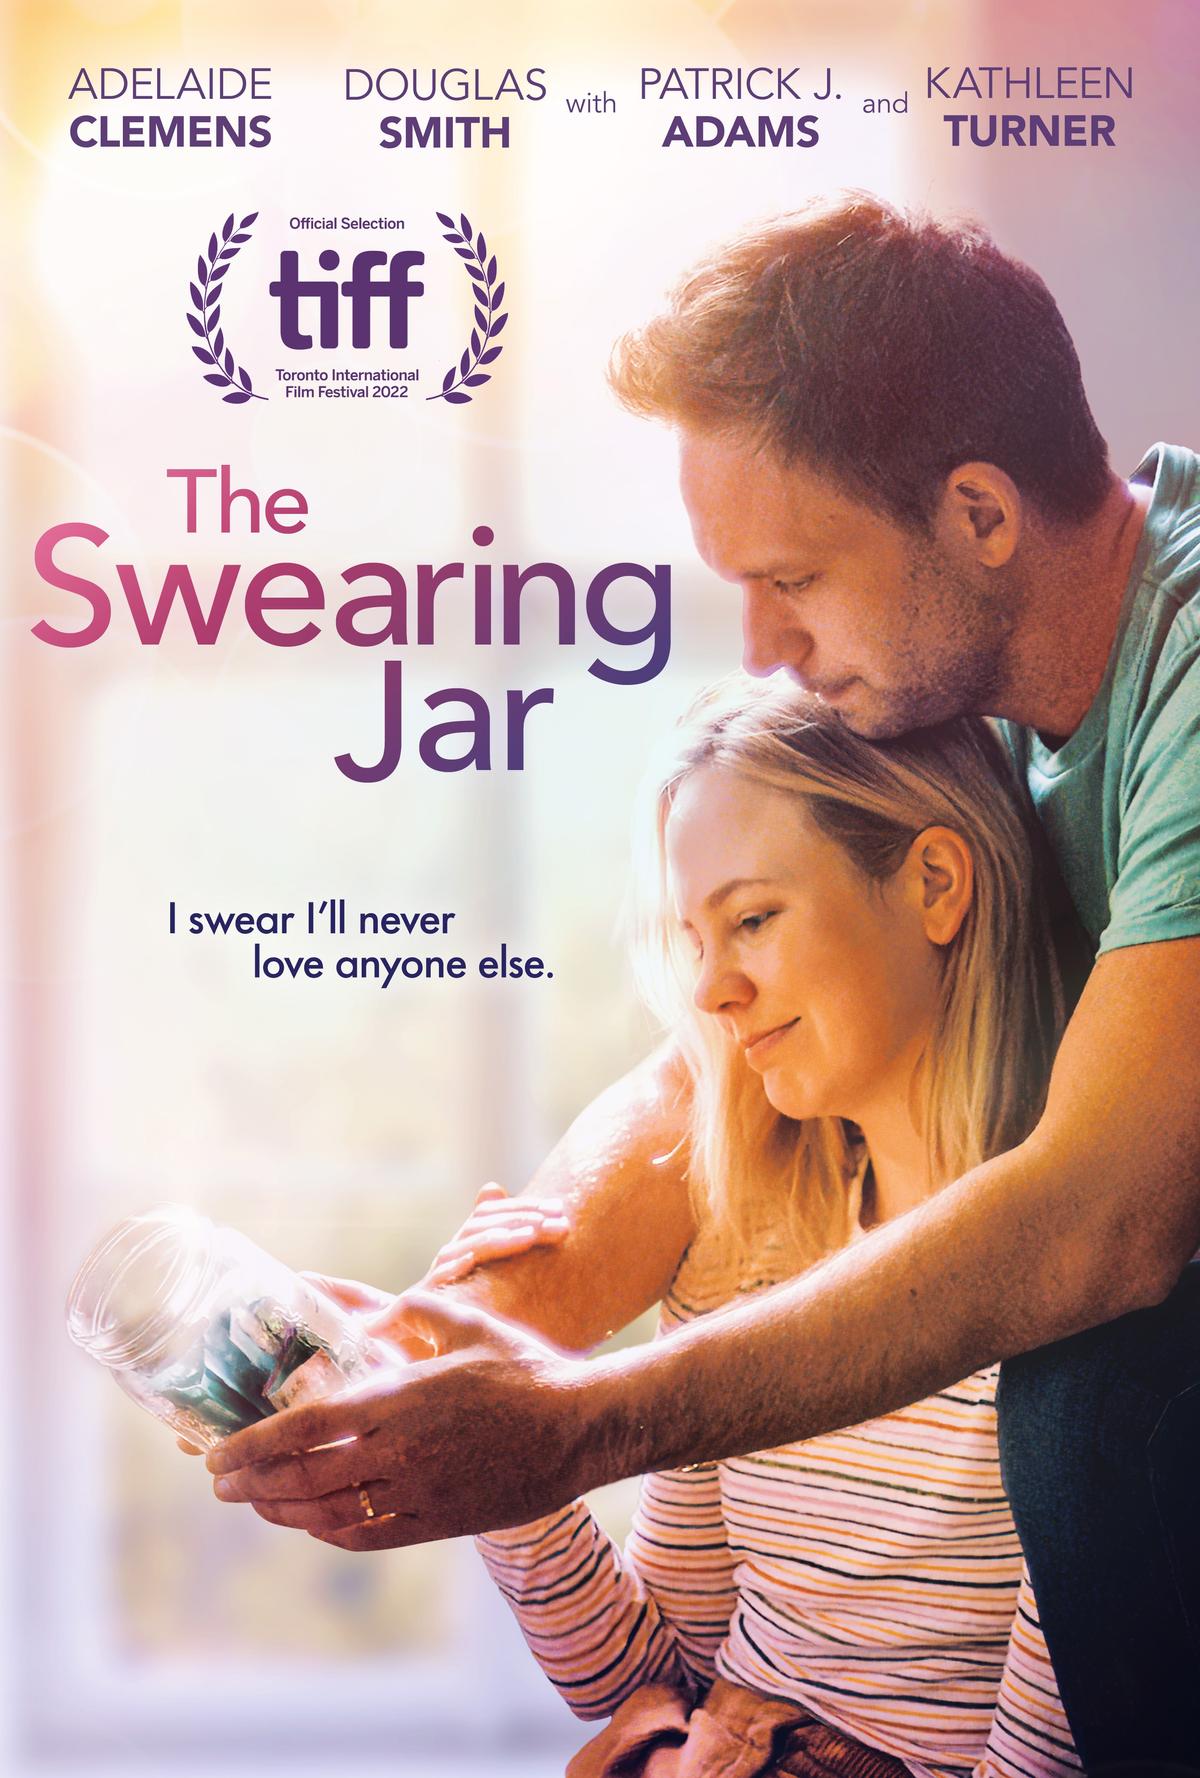 Movie poster for "The Swearing Jar."